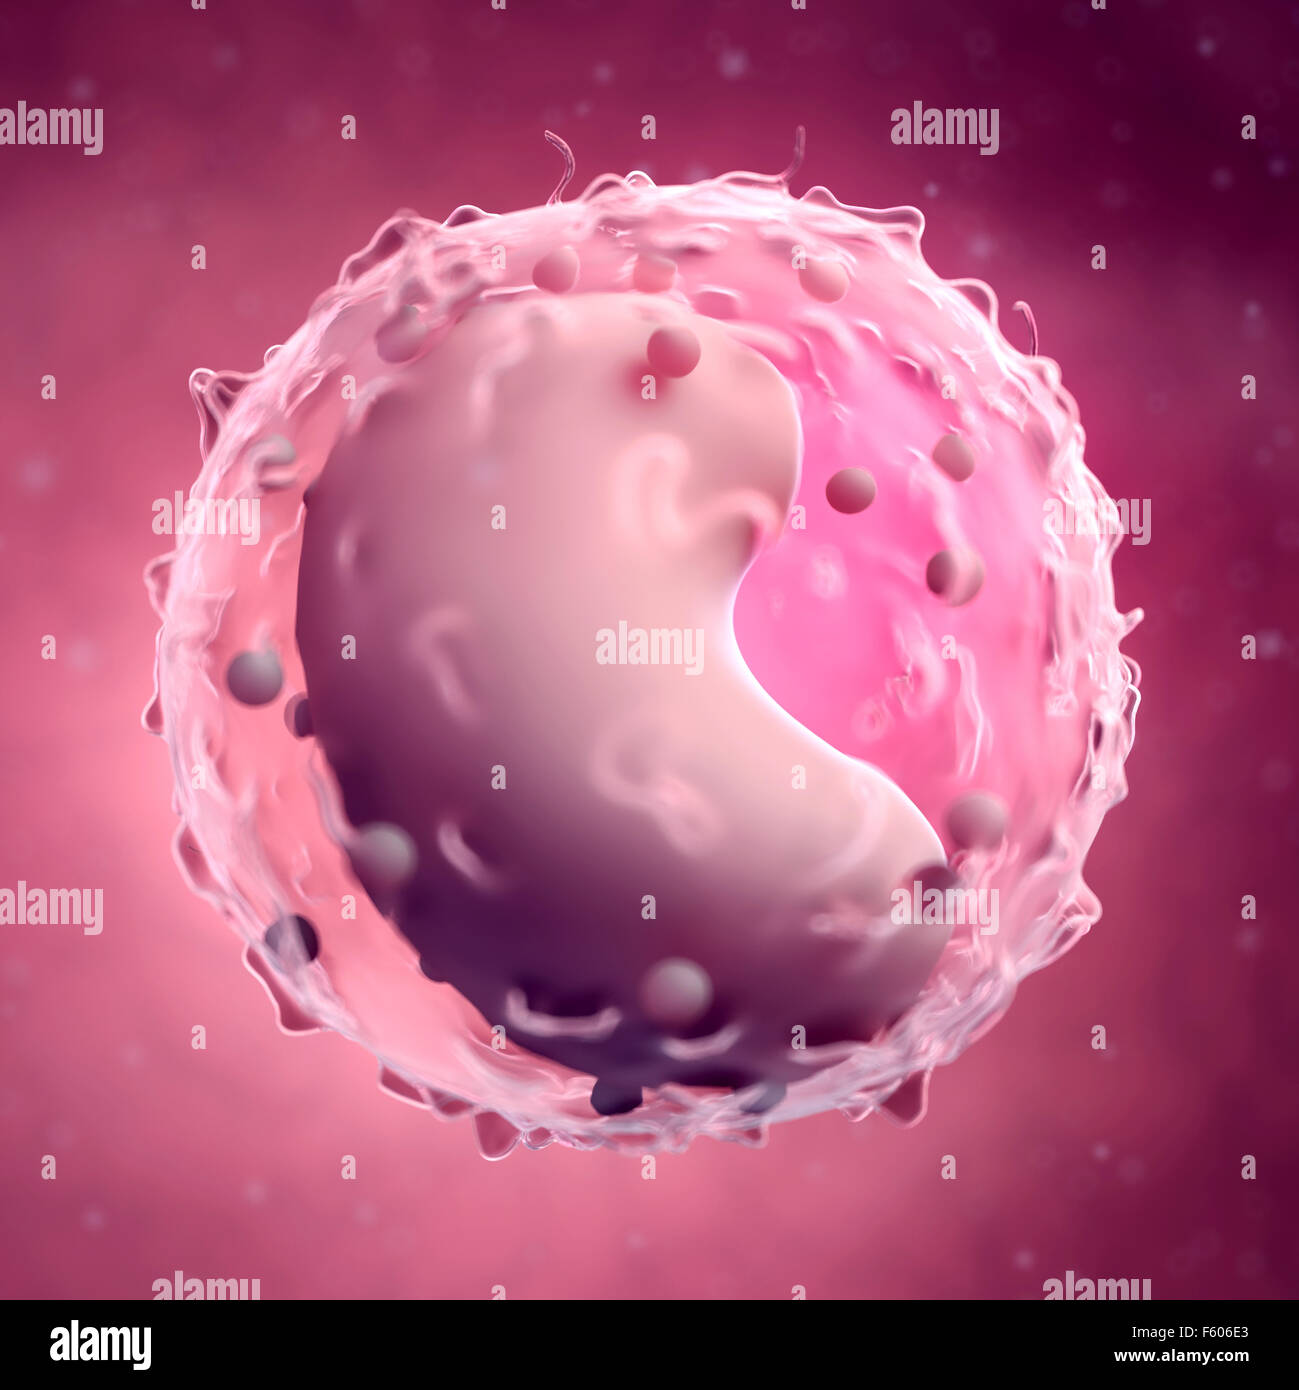 medically accurate illustration of a lymphocyte Stock Photo